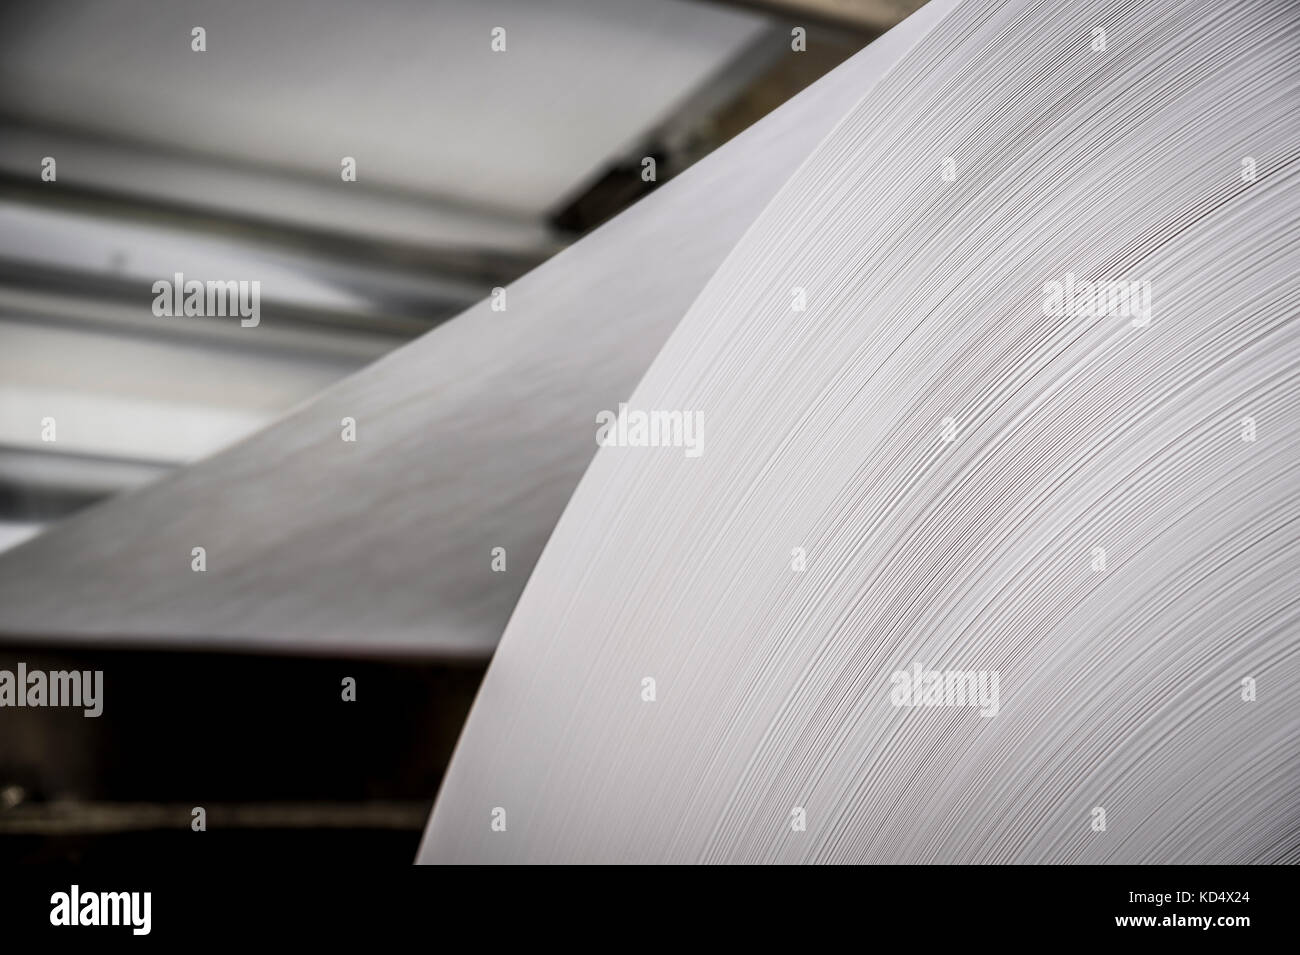 Detail Of Large White Paper Roll On Commercial Printing Press Stock Photo